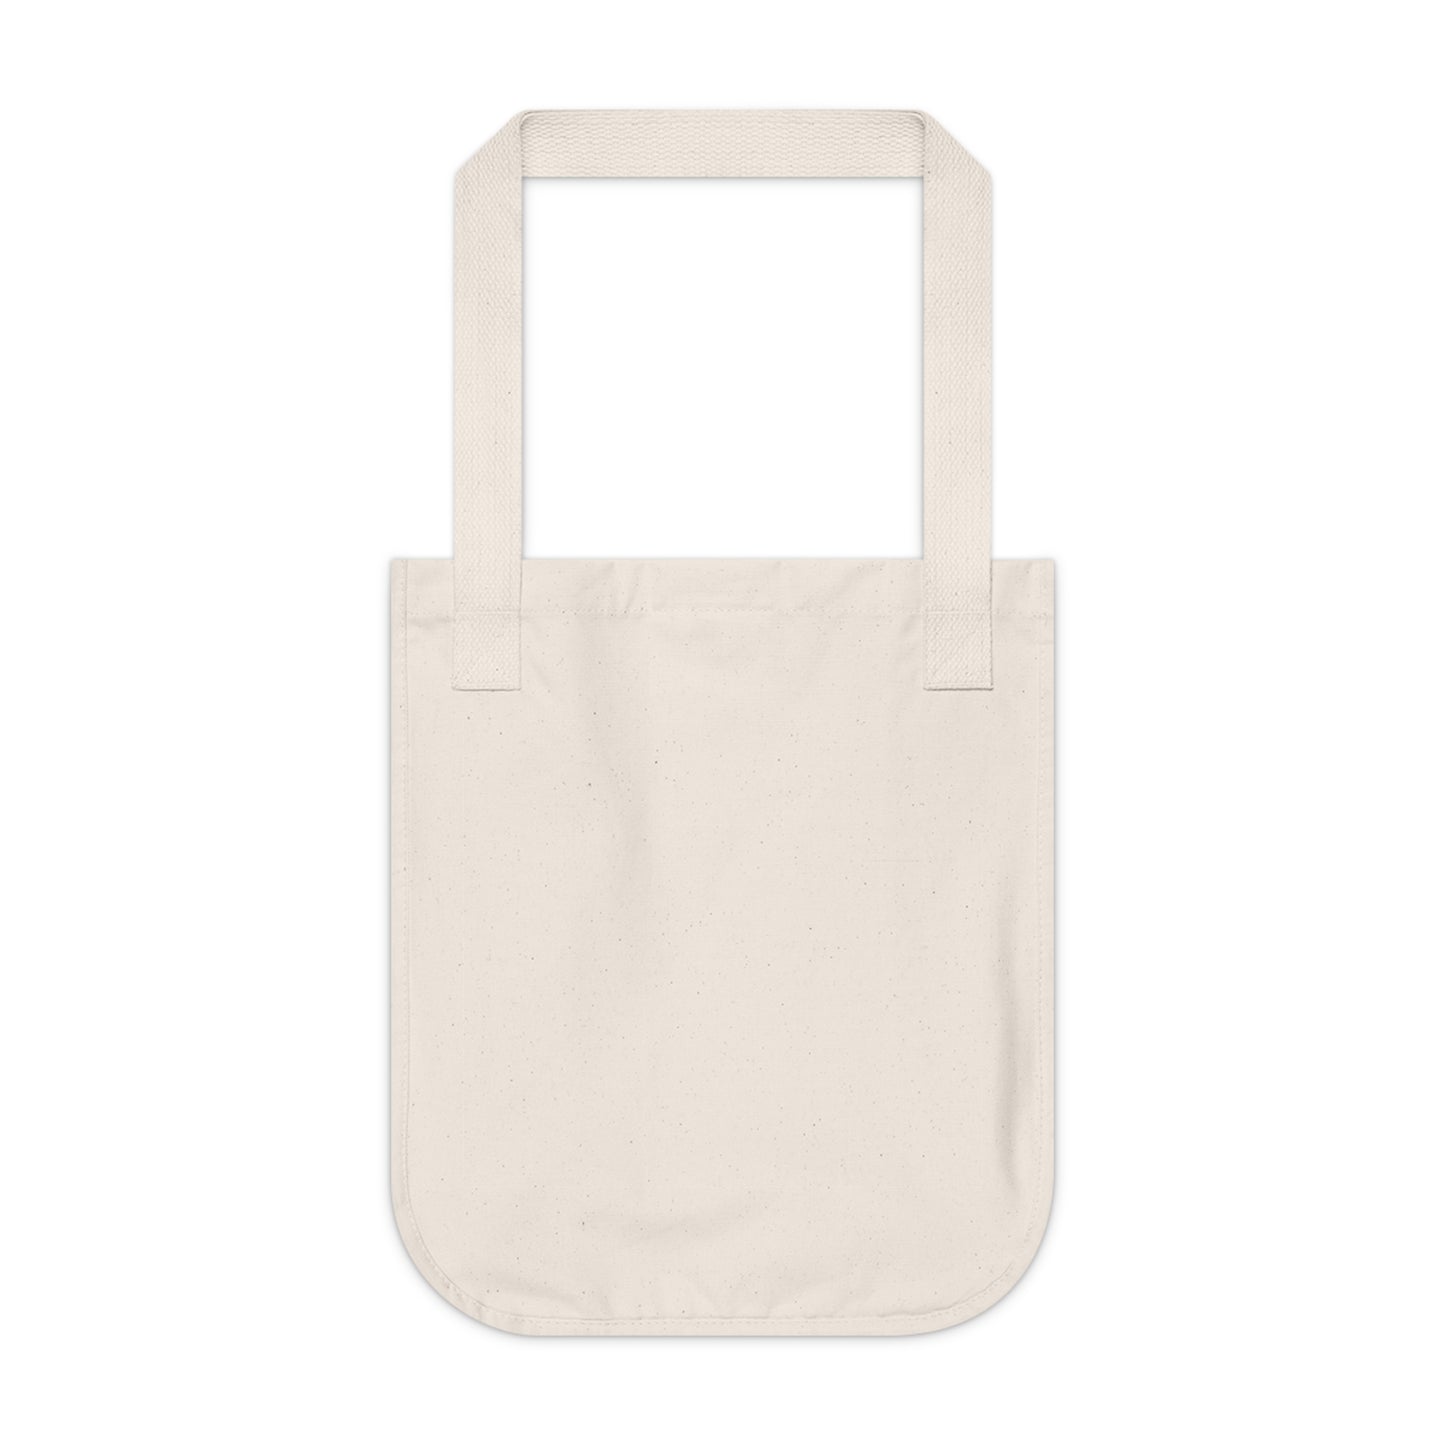 Bee Kind: The Eco-Friendly Tote Bag That Shows Your Love for Nature and Compassion